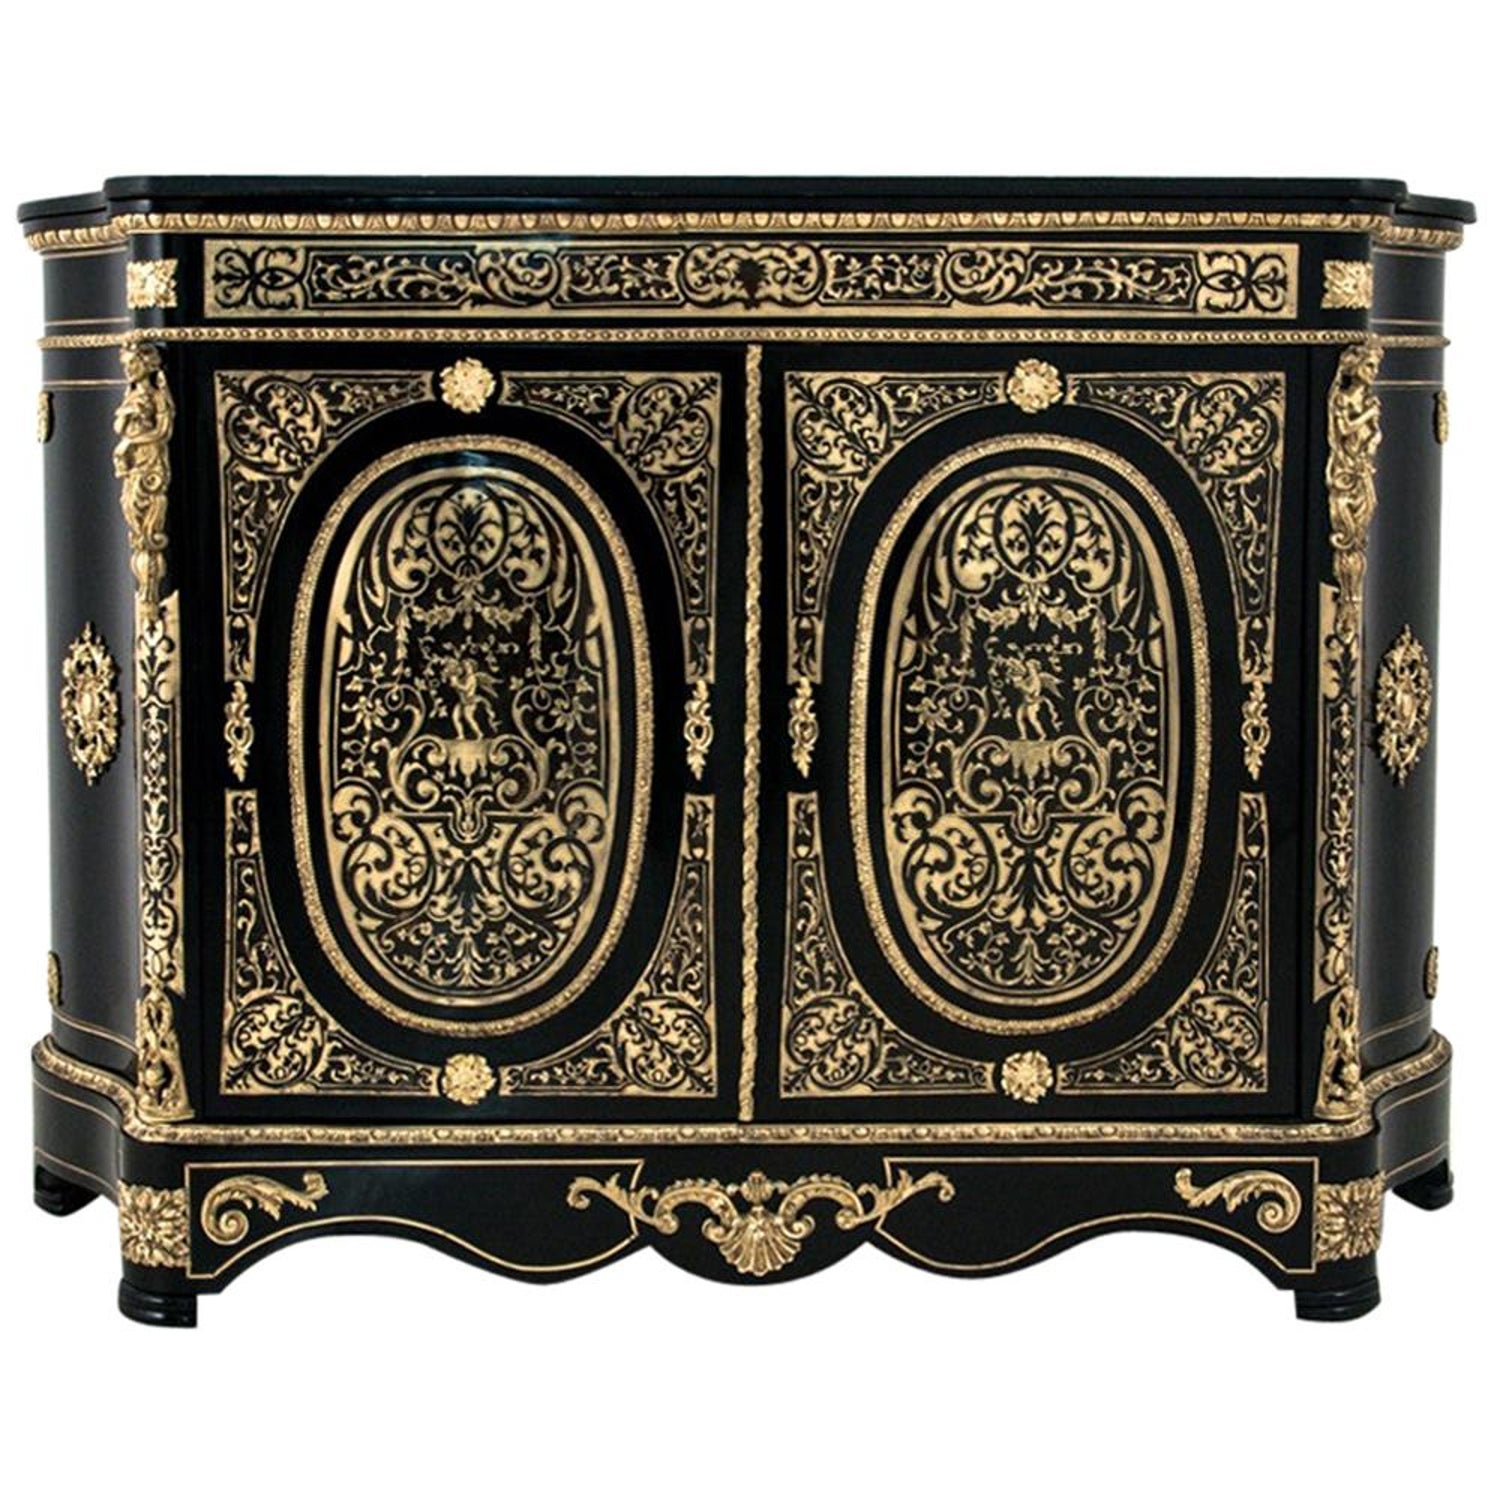 Boulle cabinet, France, circa 1860. For Sale at 1stDibs